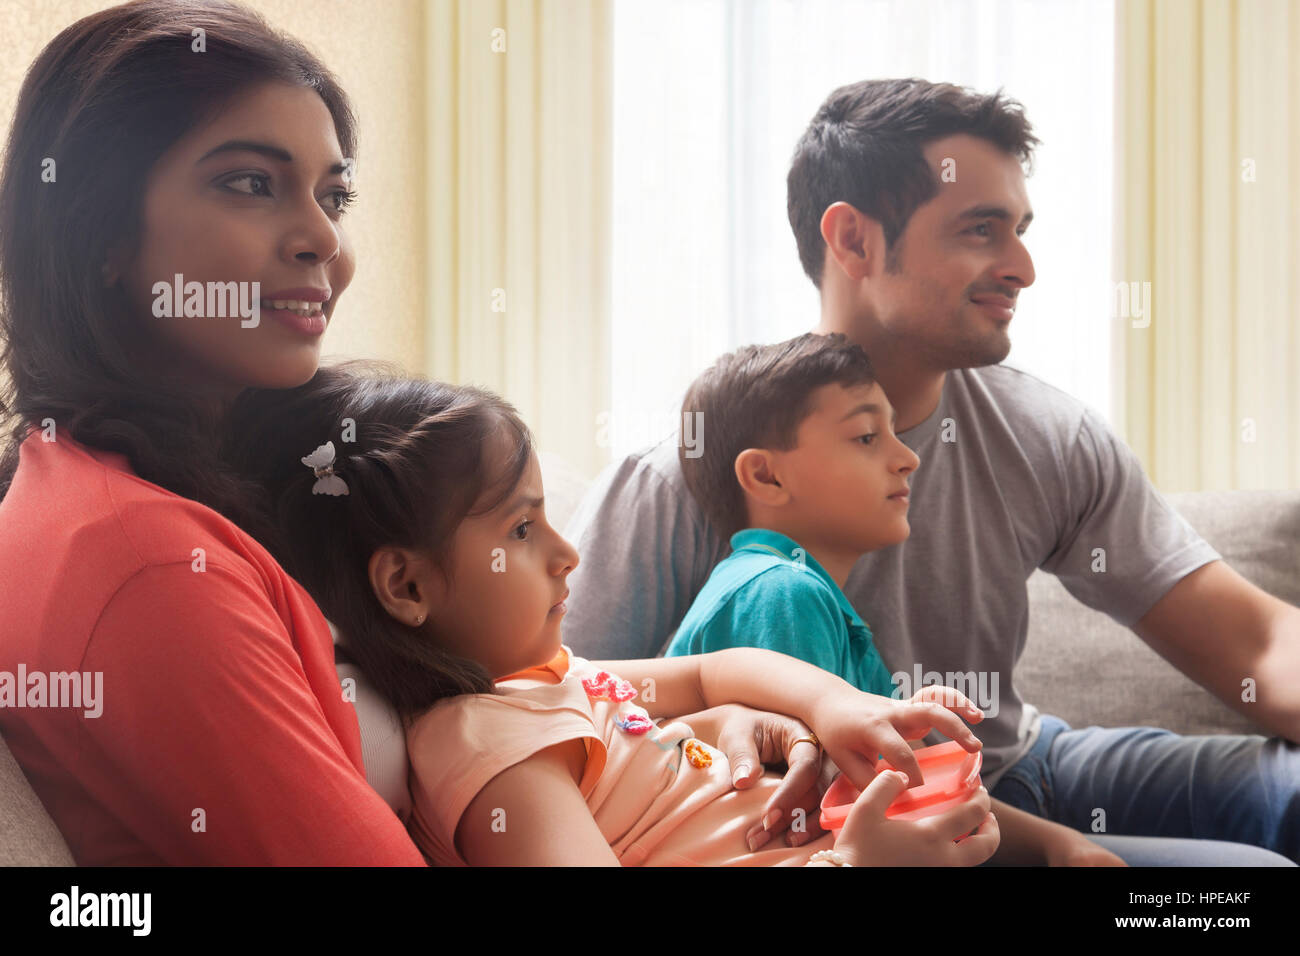 Family with son and daughter sitting on sofa and watching TV Stock Photo